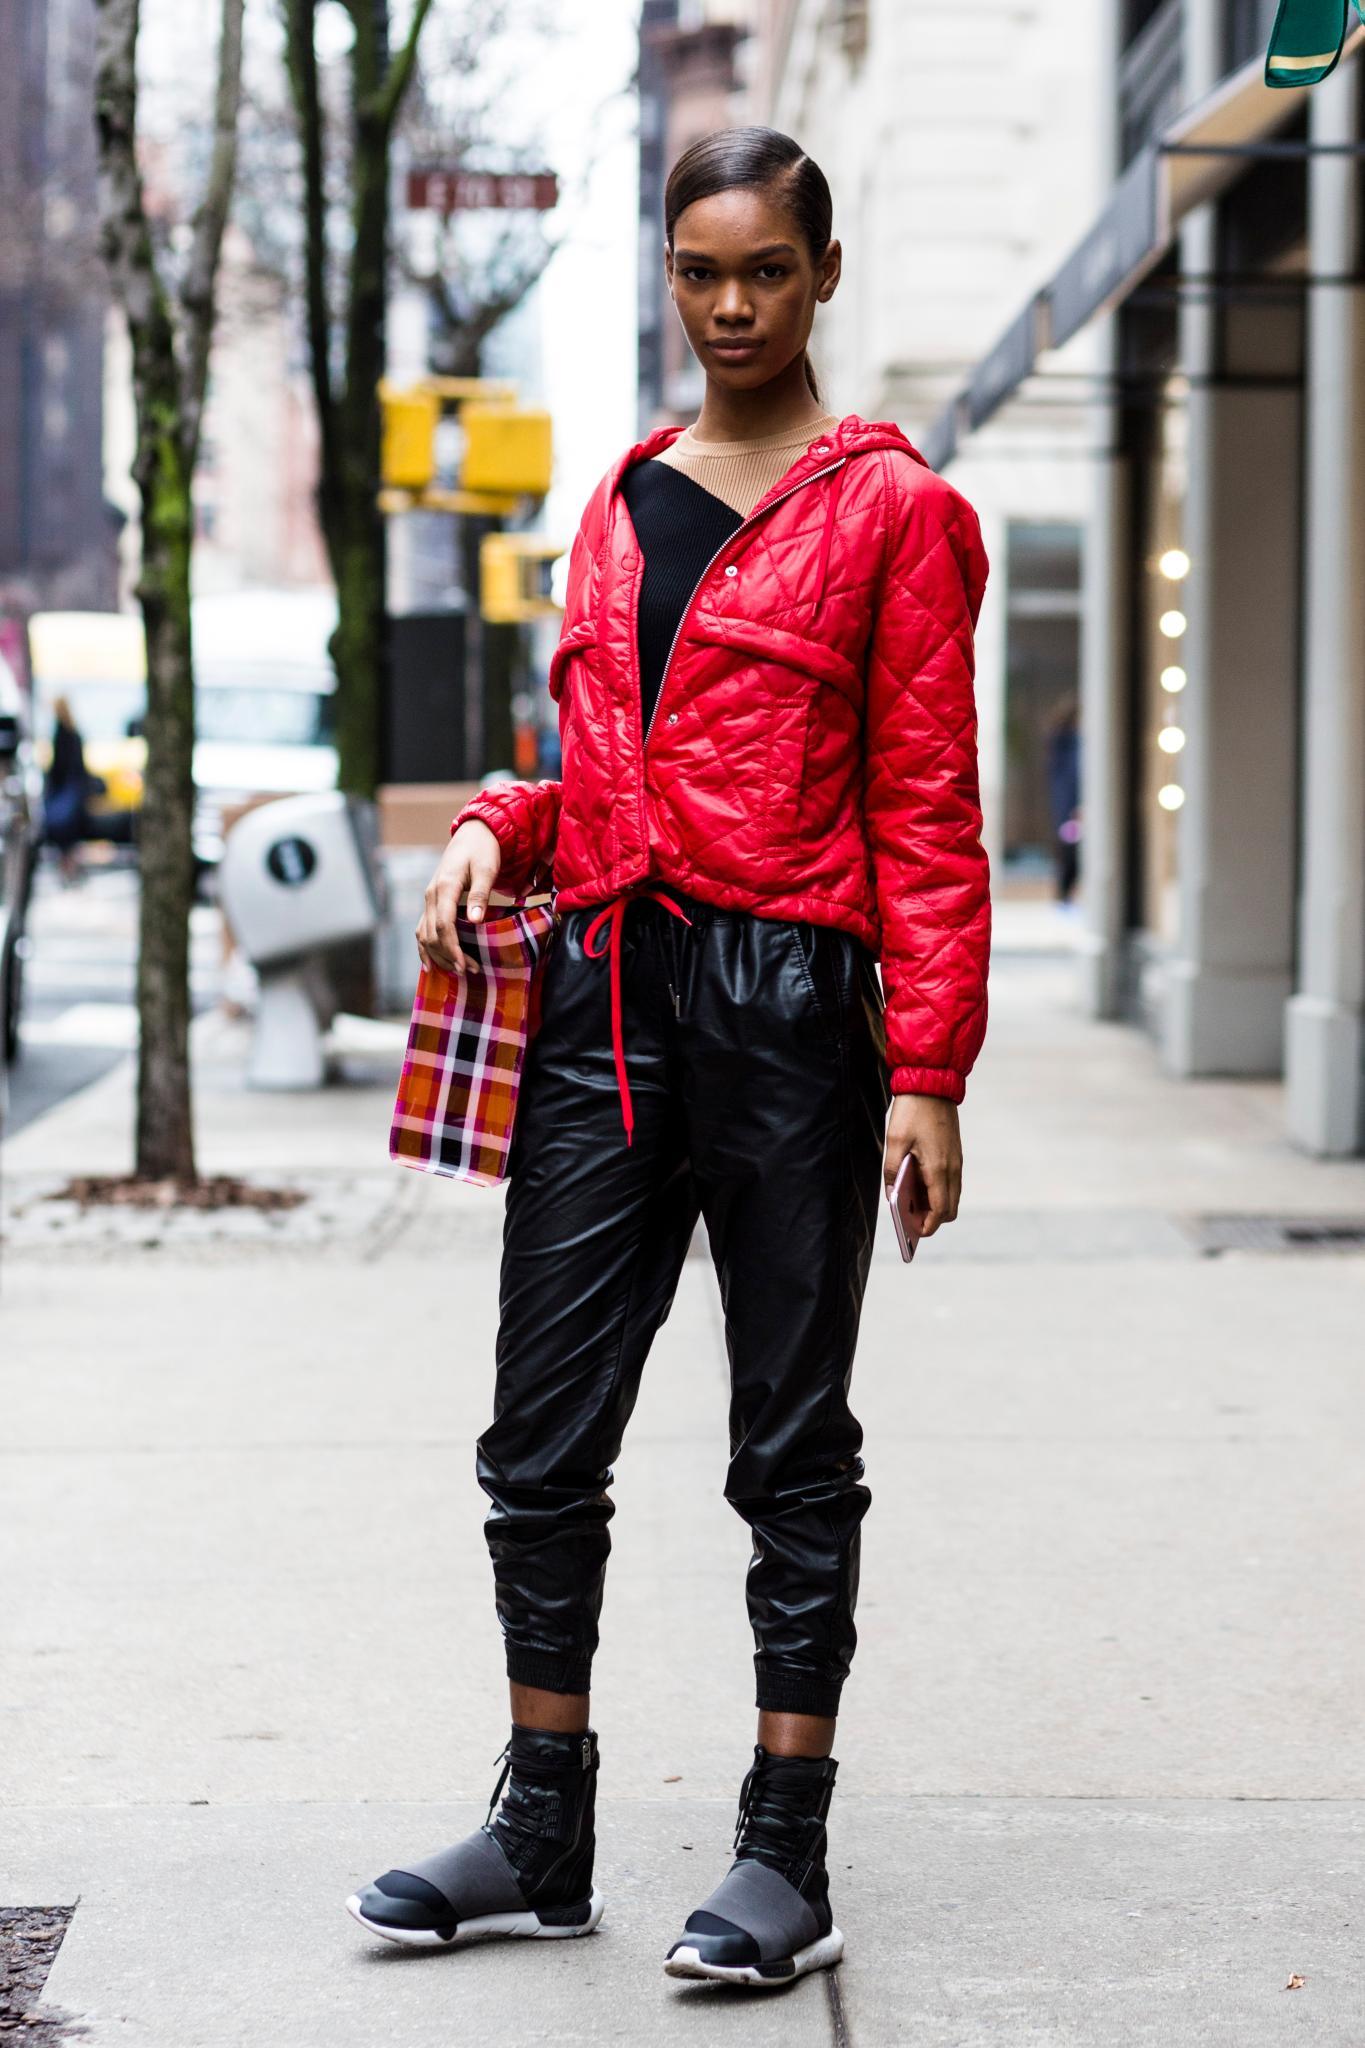 Sharp Part Street Style Trend: 3 Tips for Nailing the Look | All Things ...